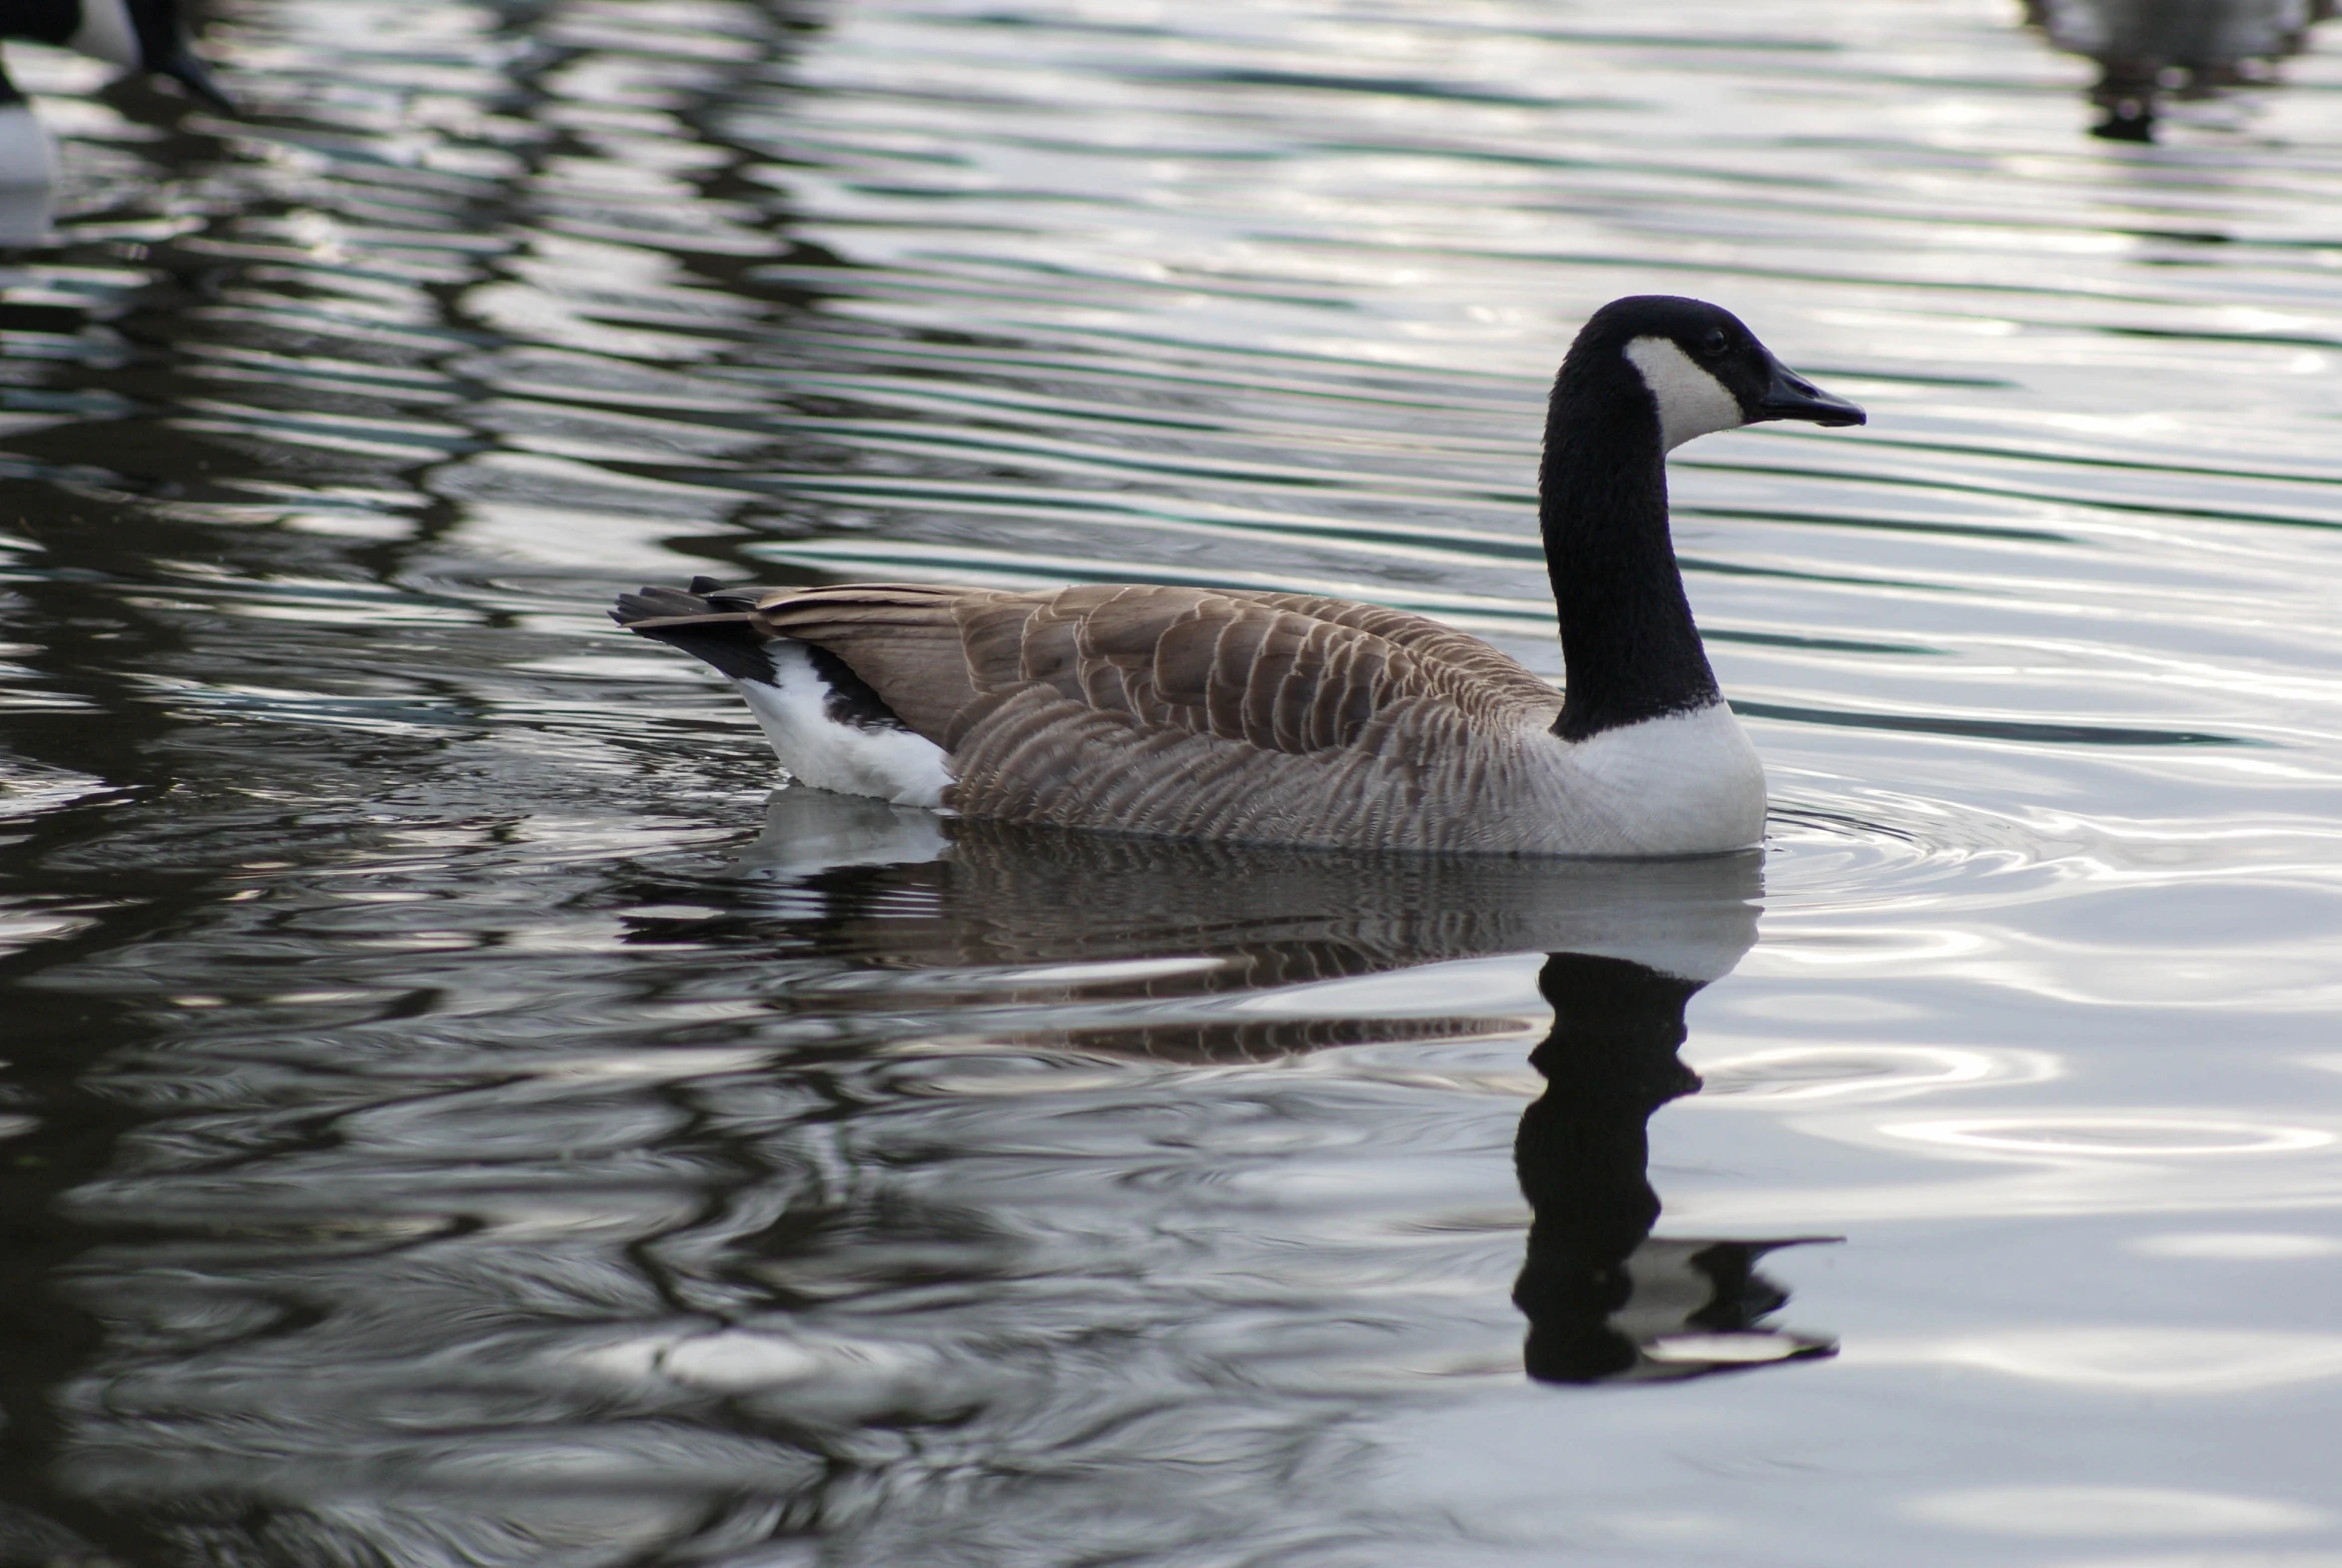 a goose swimming on a body of water